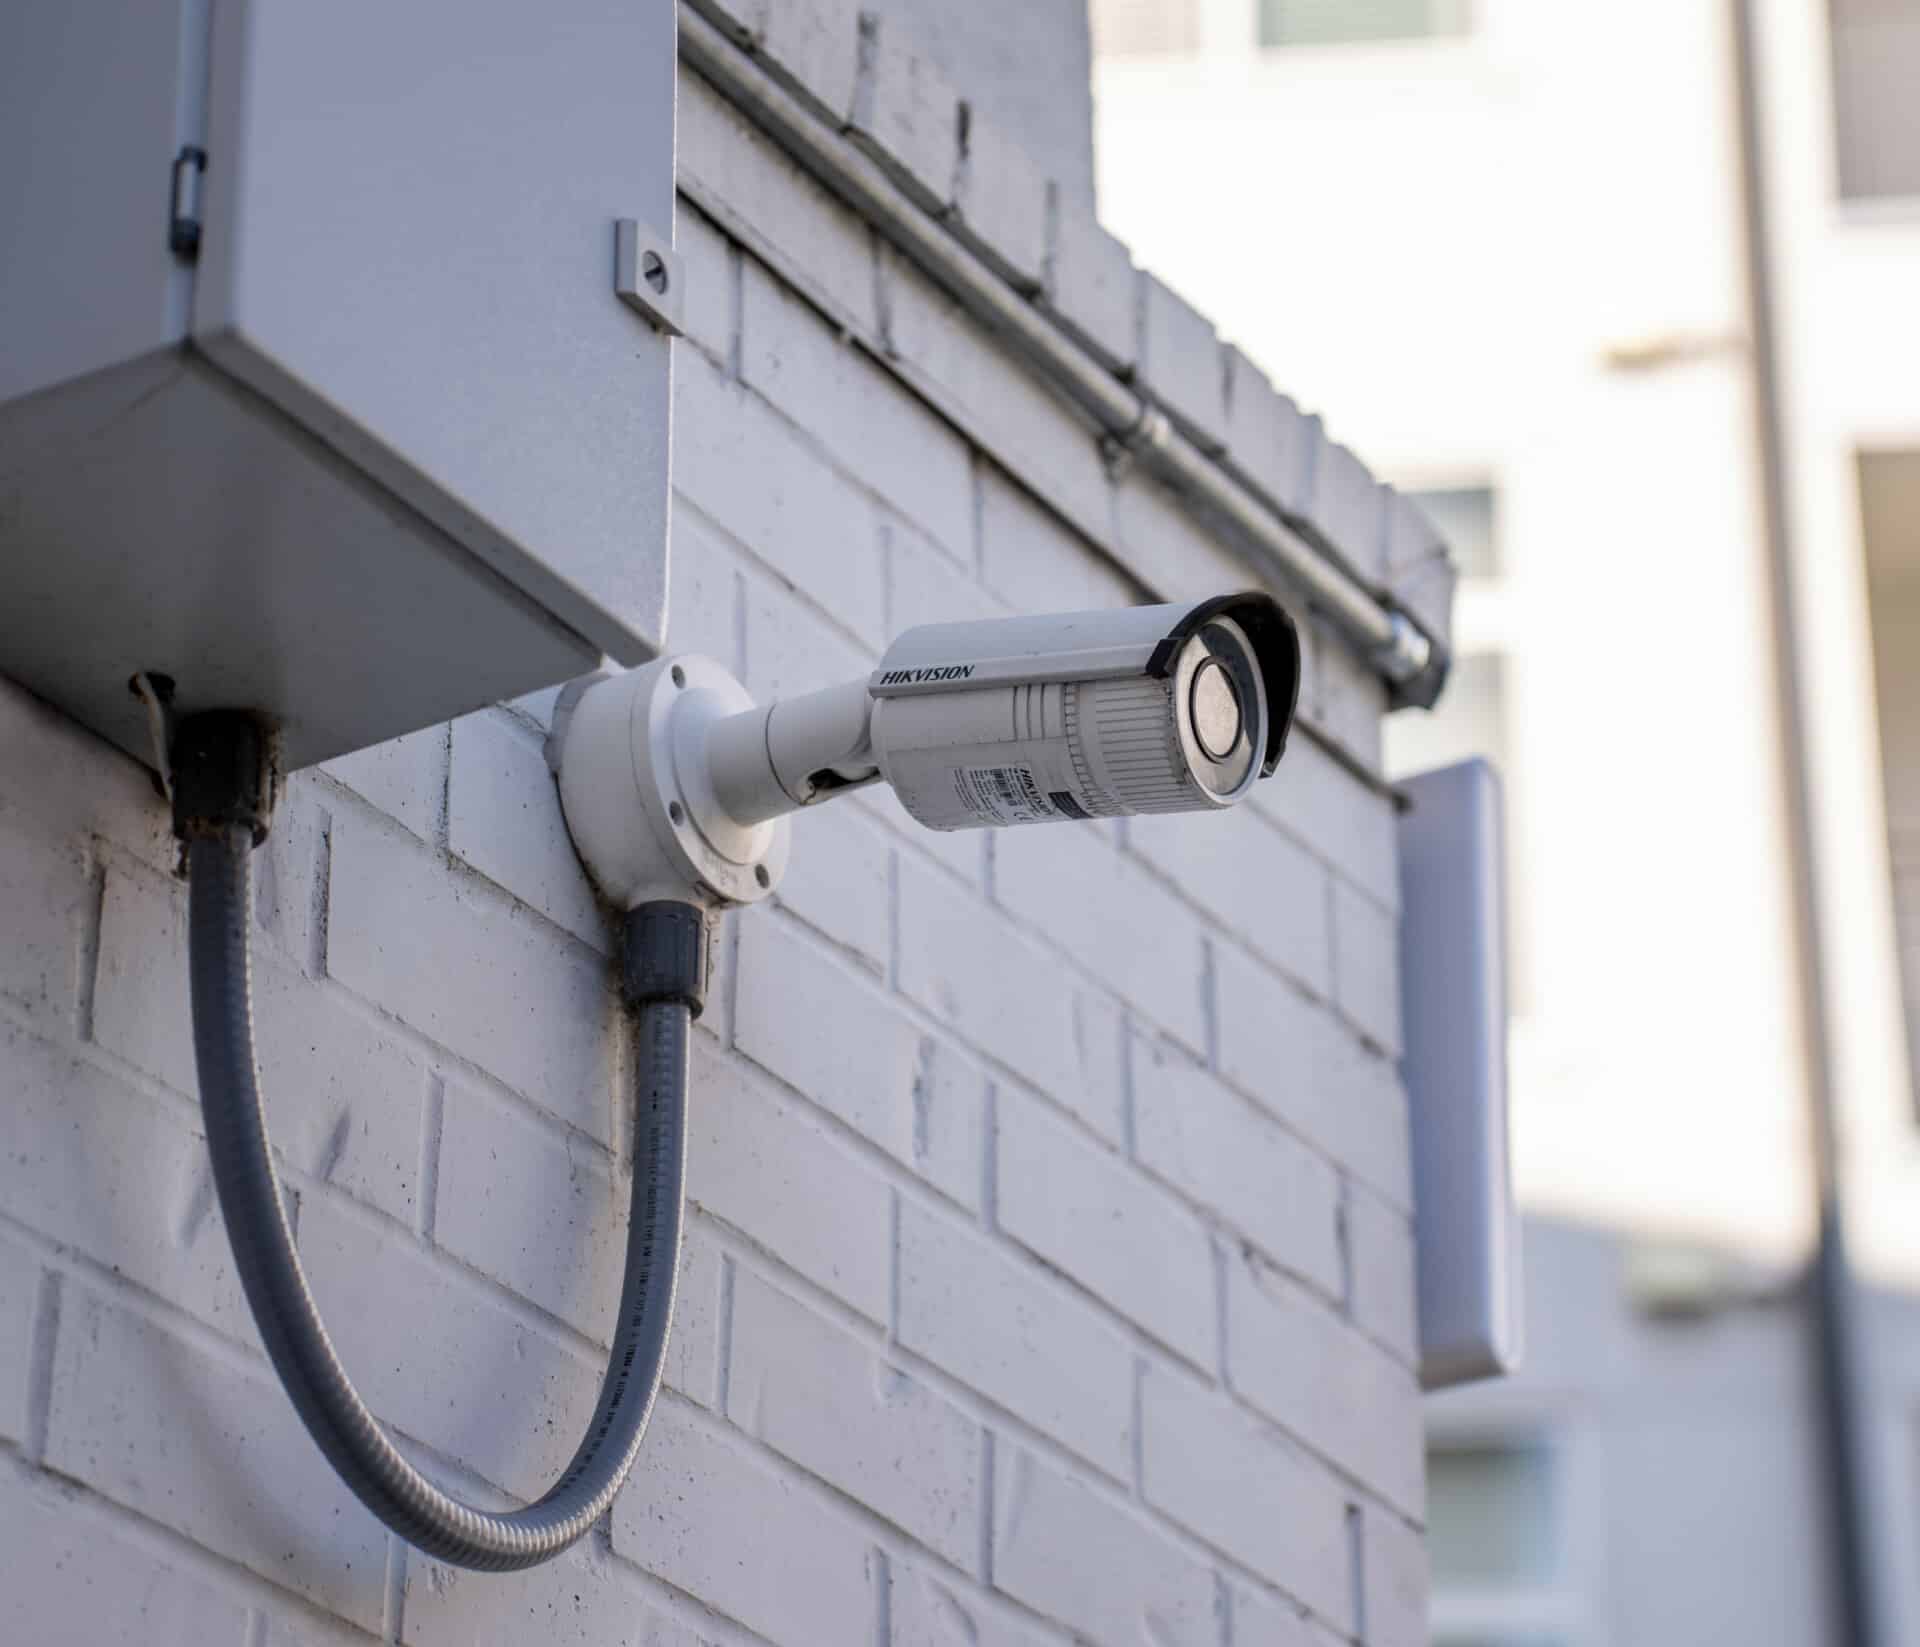 An external security camera is mounted to the control box on the side of a brick building.